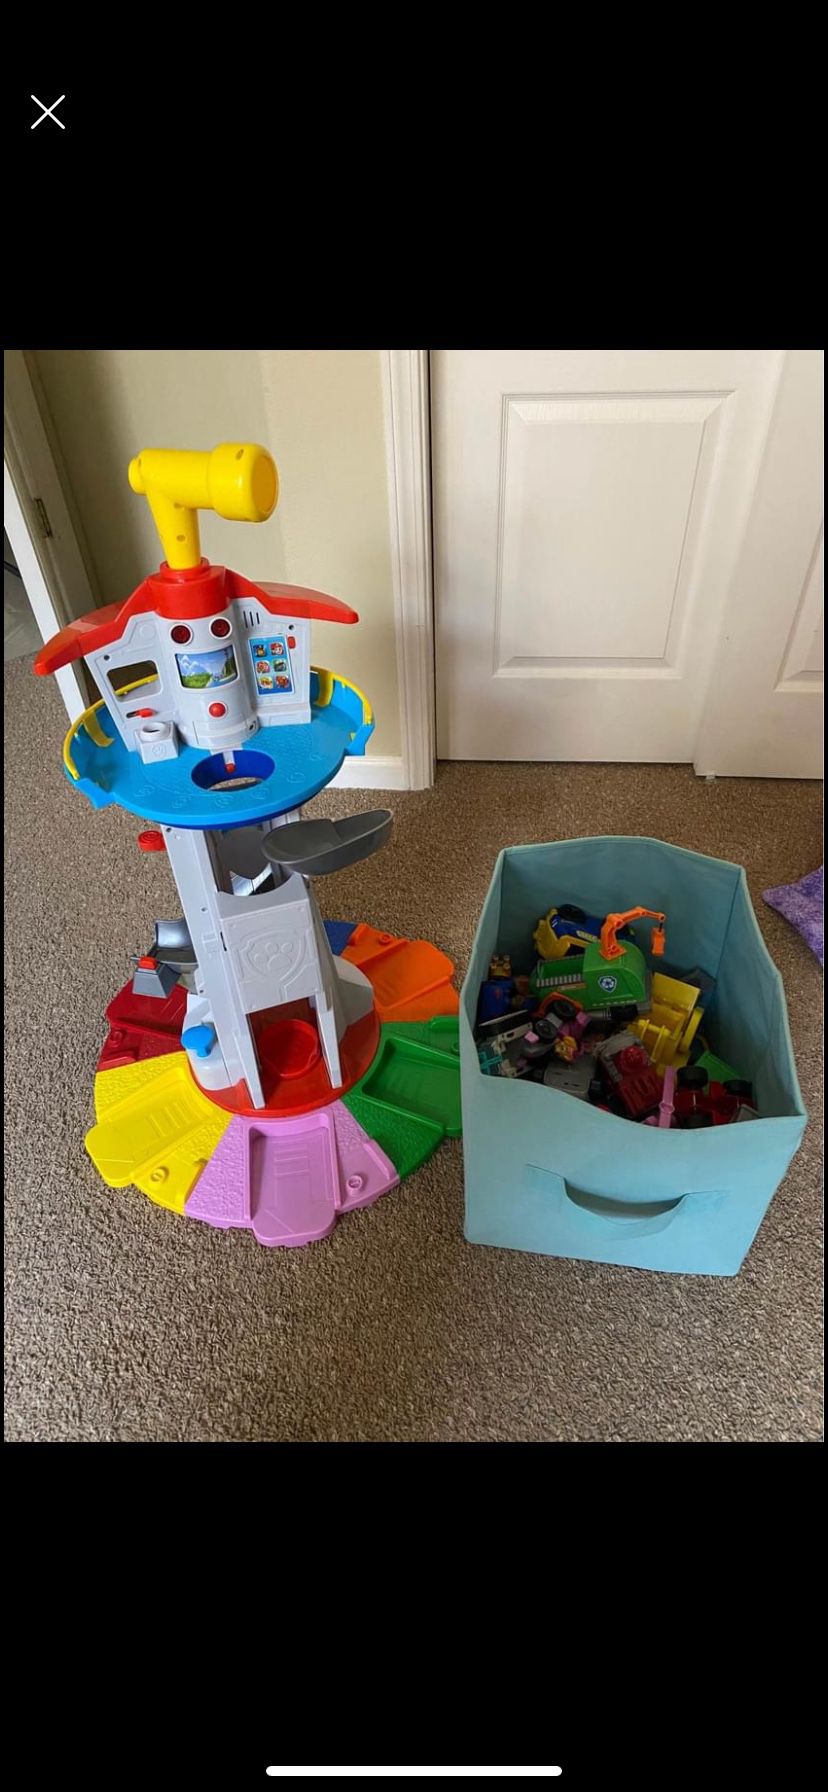 Paw patrol tower and characters